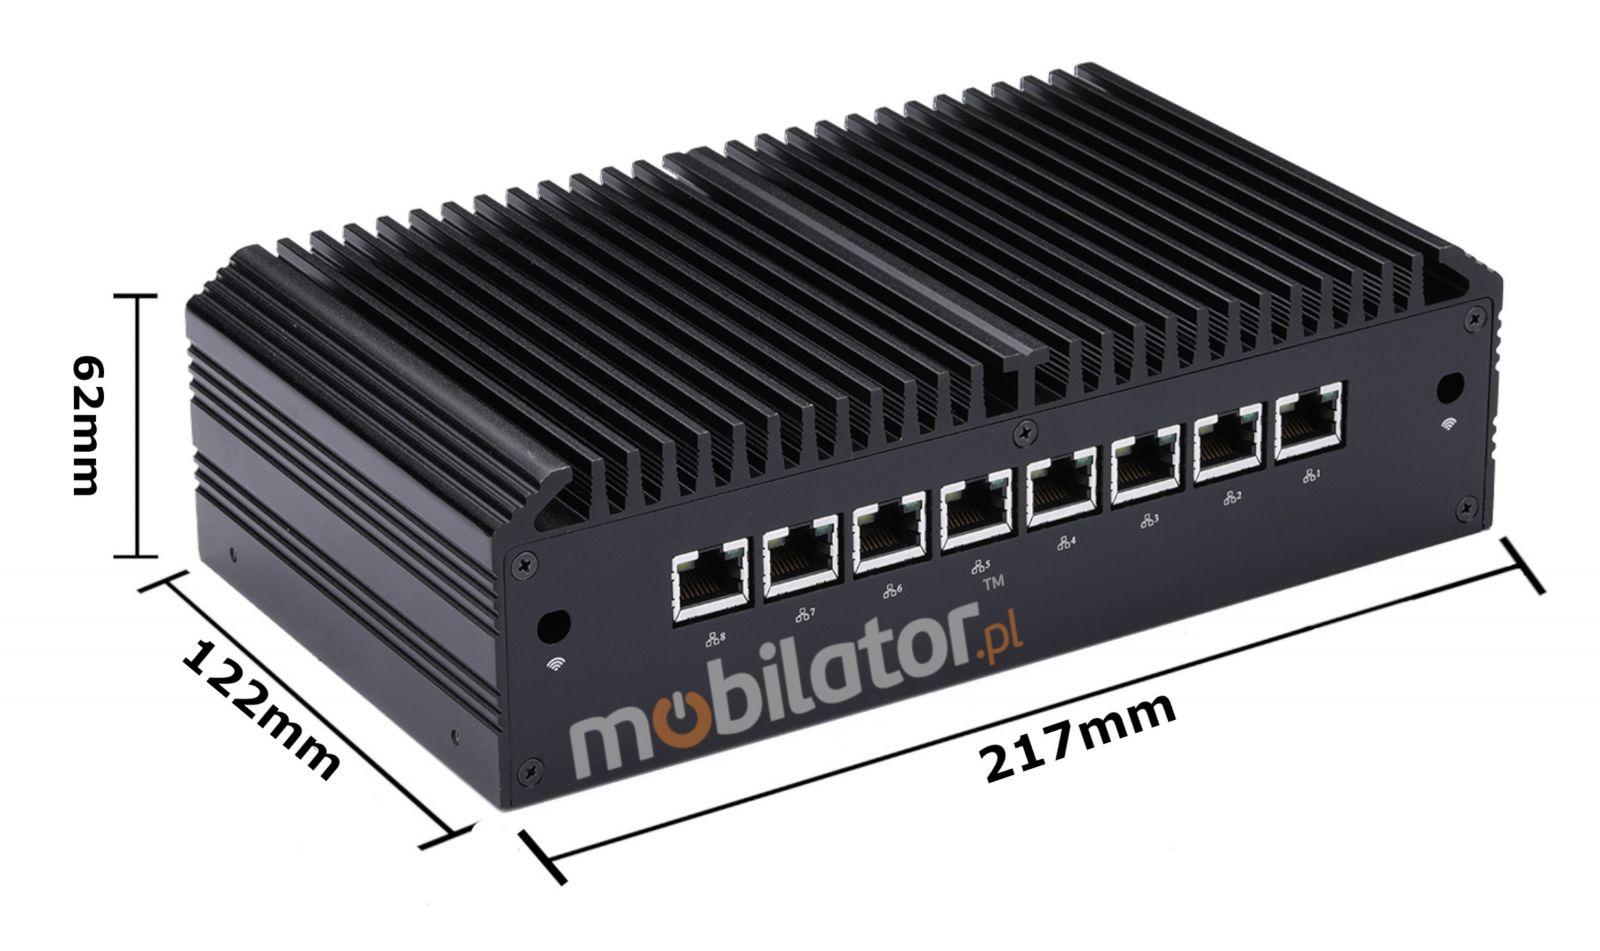 compact size of the multifunctional MiniPC Q838GE